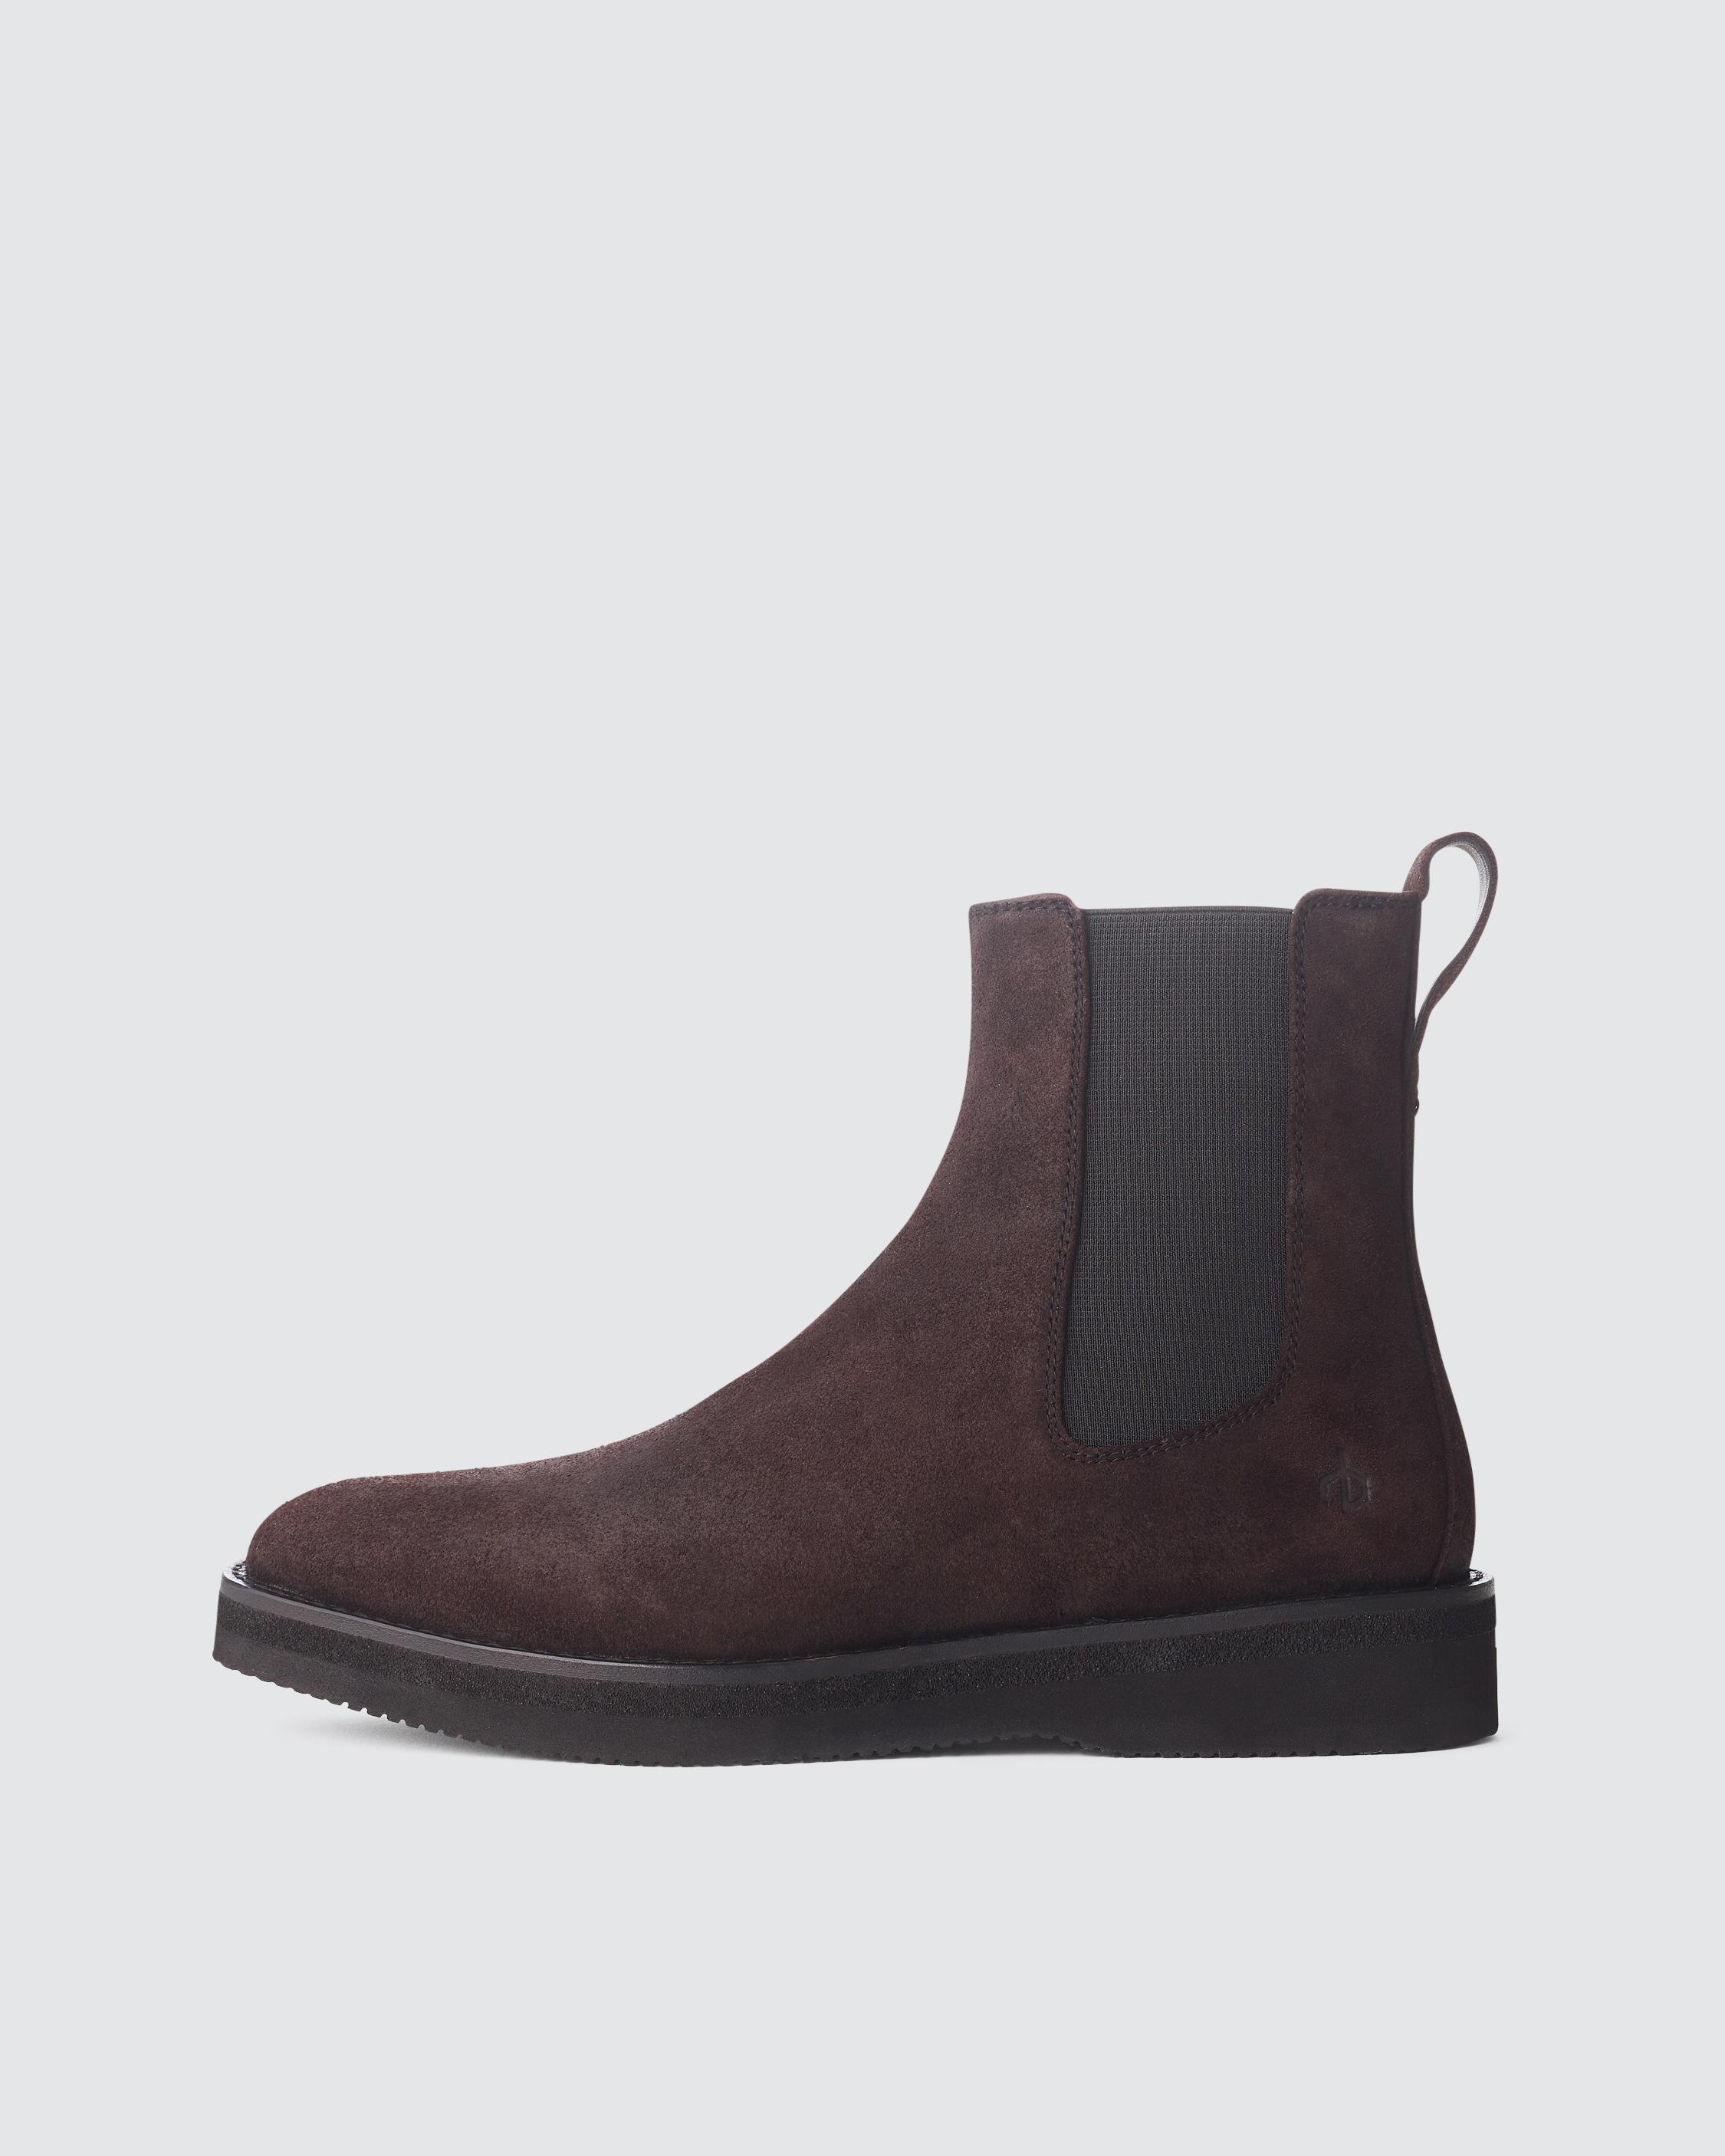 Bedford Boot - Suede
Chelsea Boot - 1